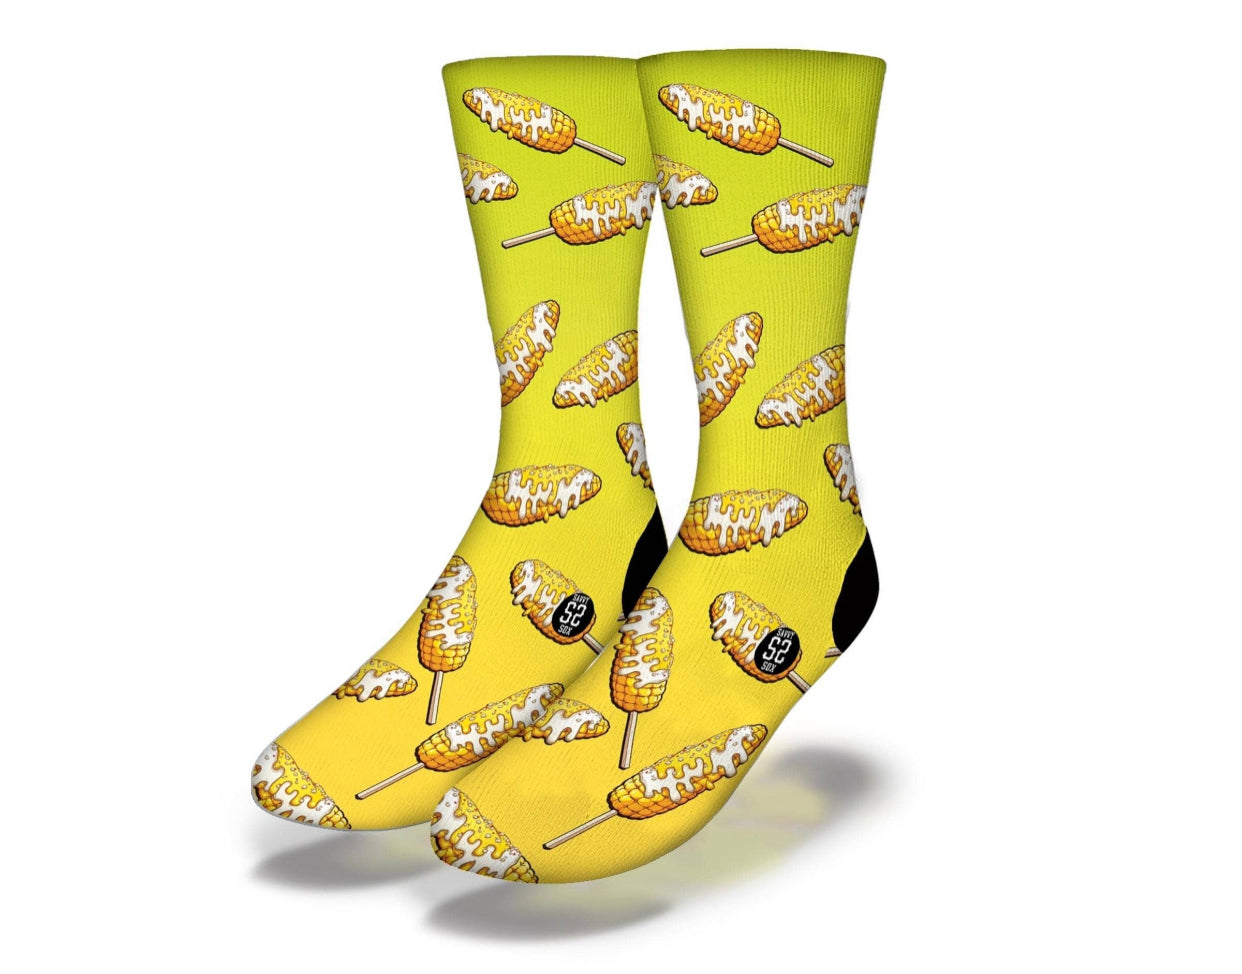 Men's mid calf yellow elote socks with black accent color.